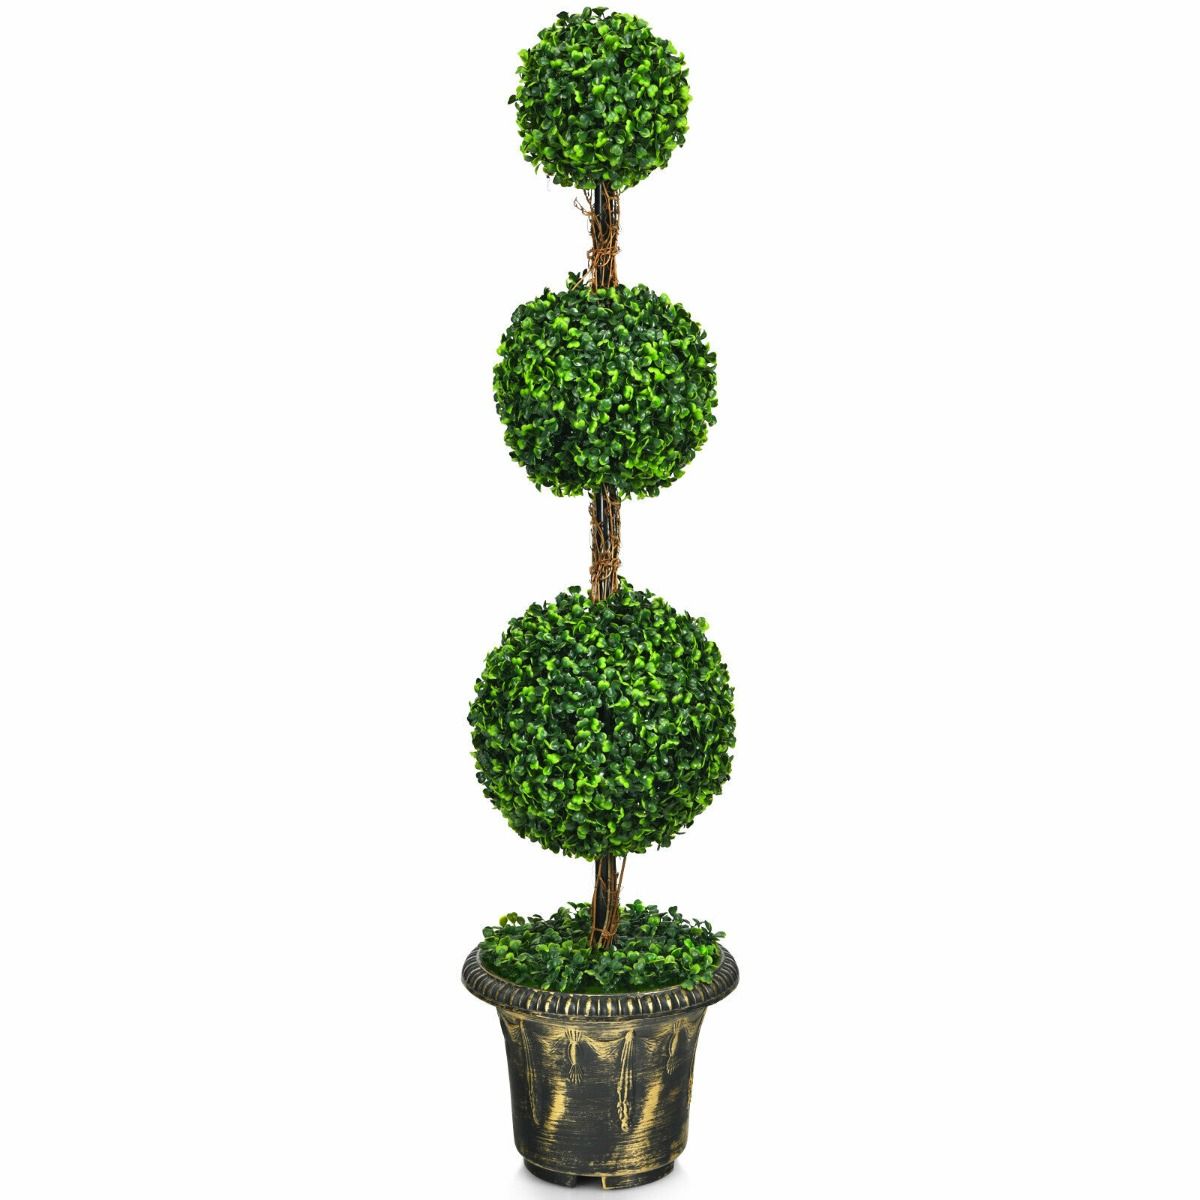 Artificial Triple Ball Shaped Topiary Tree with Wooden Rattan